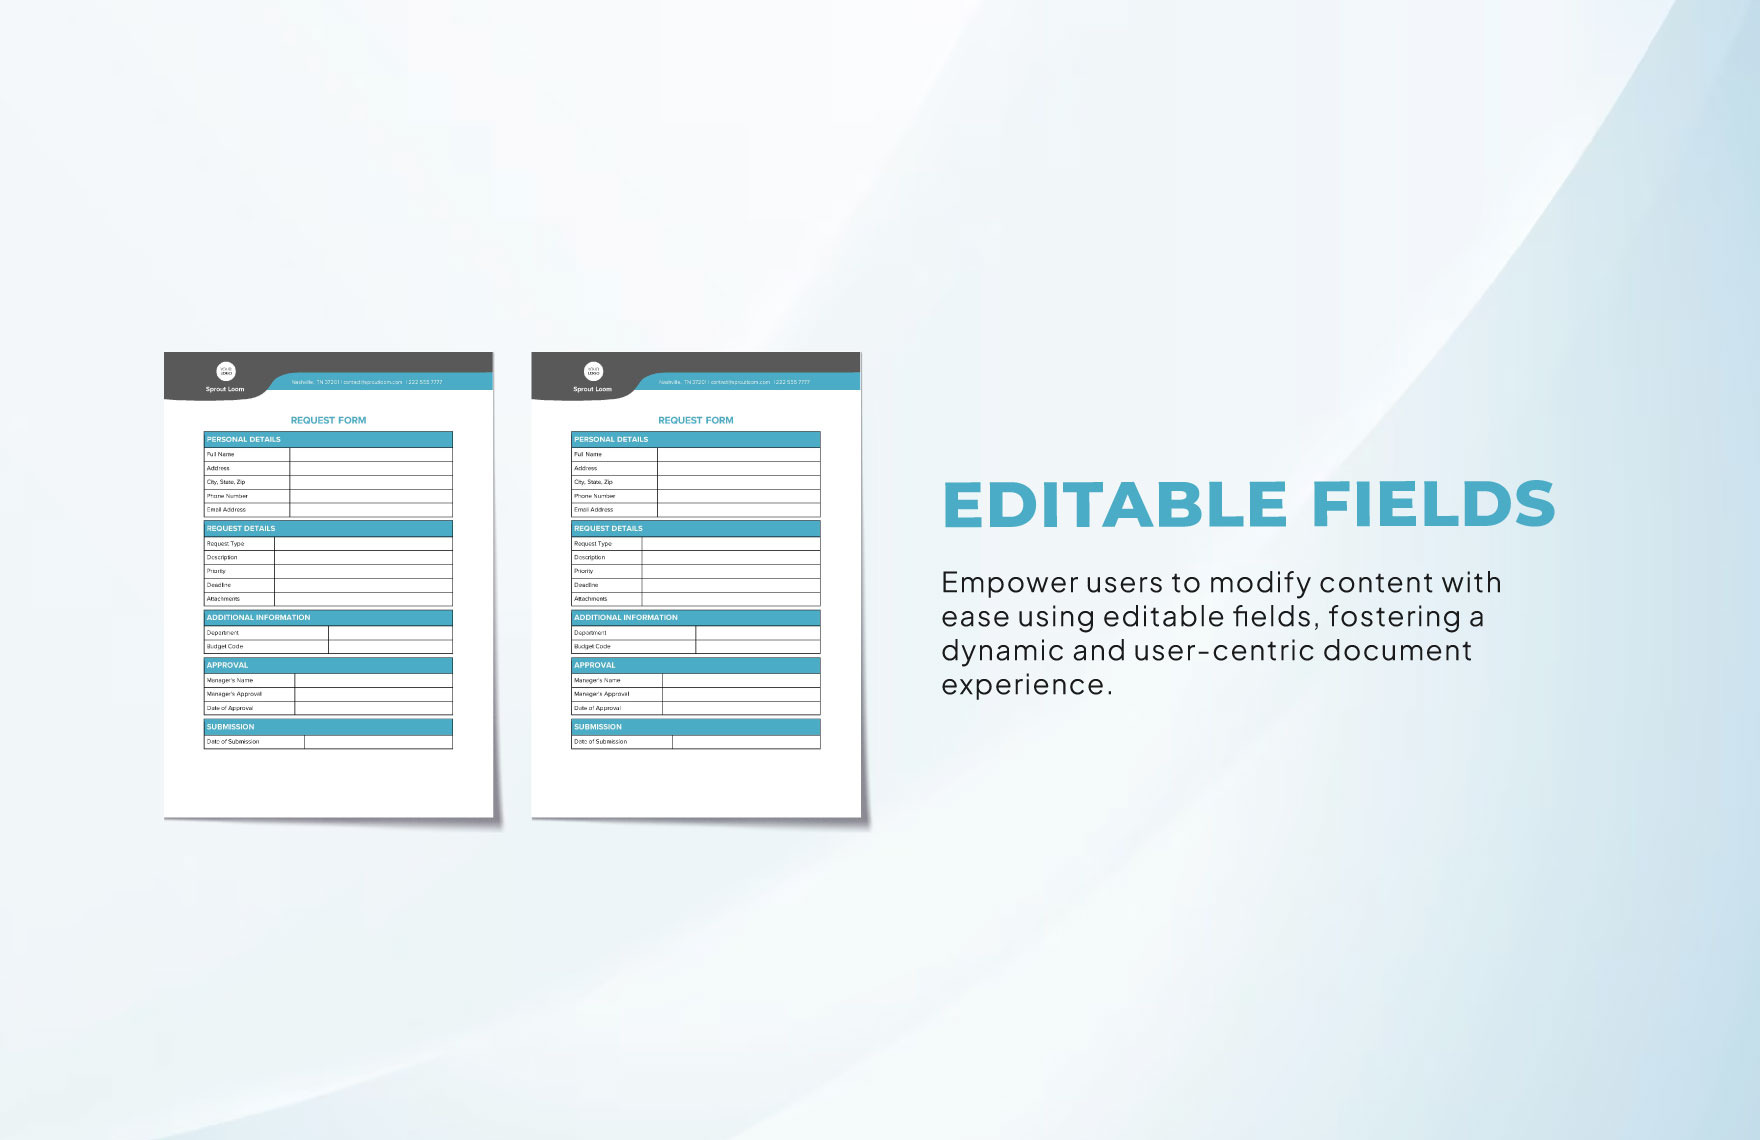 Fillable Forms Template